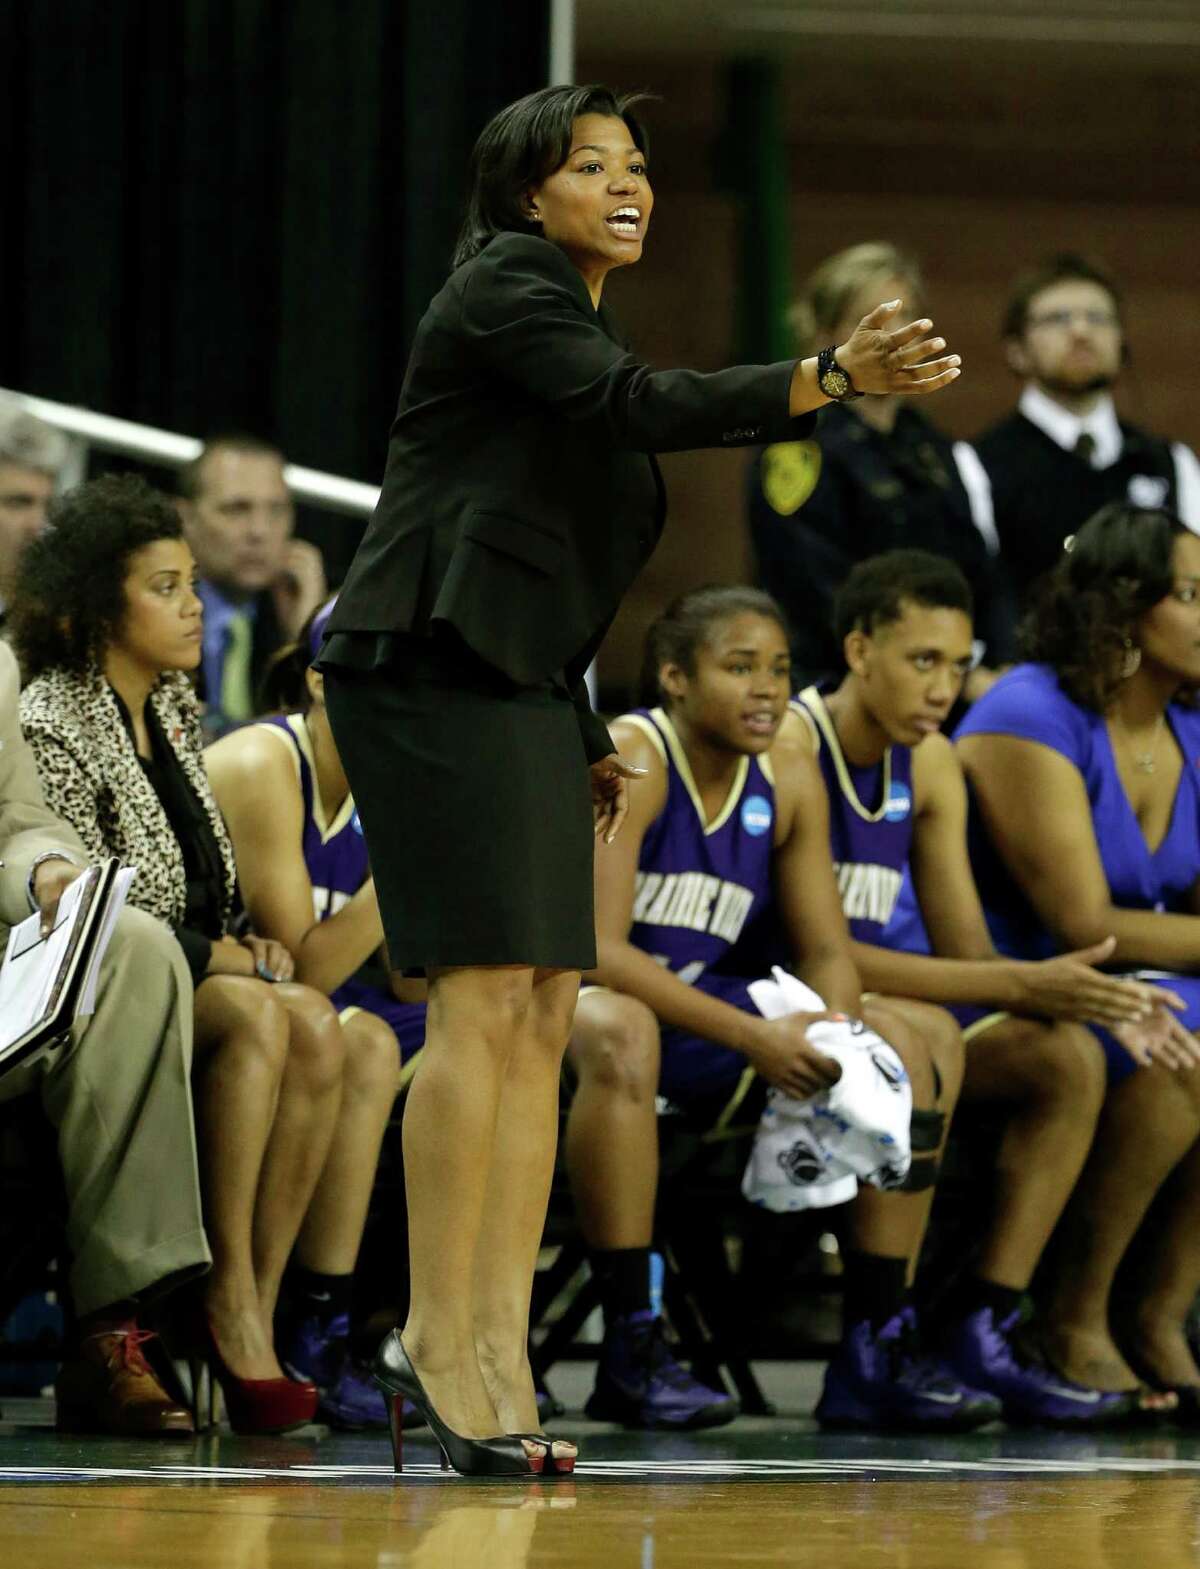 PV women's basketball coach to join Baylor staff